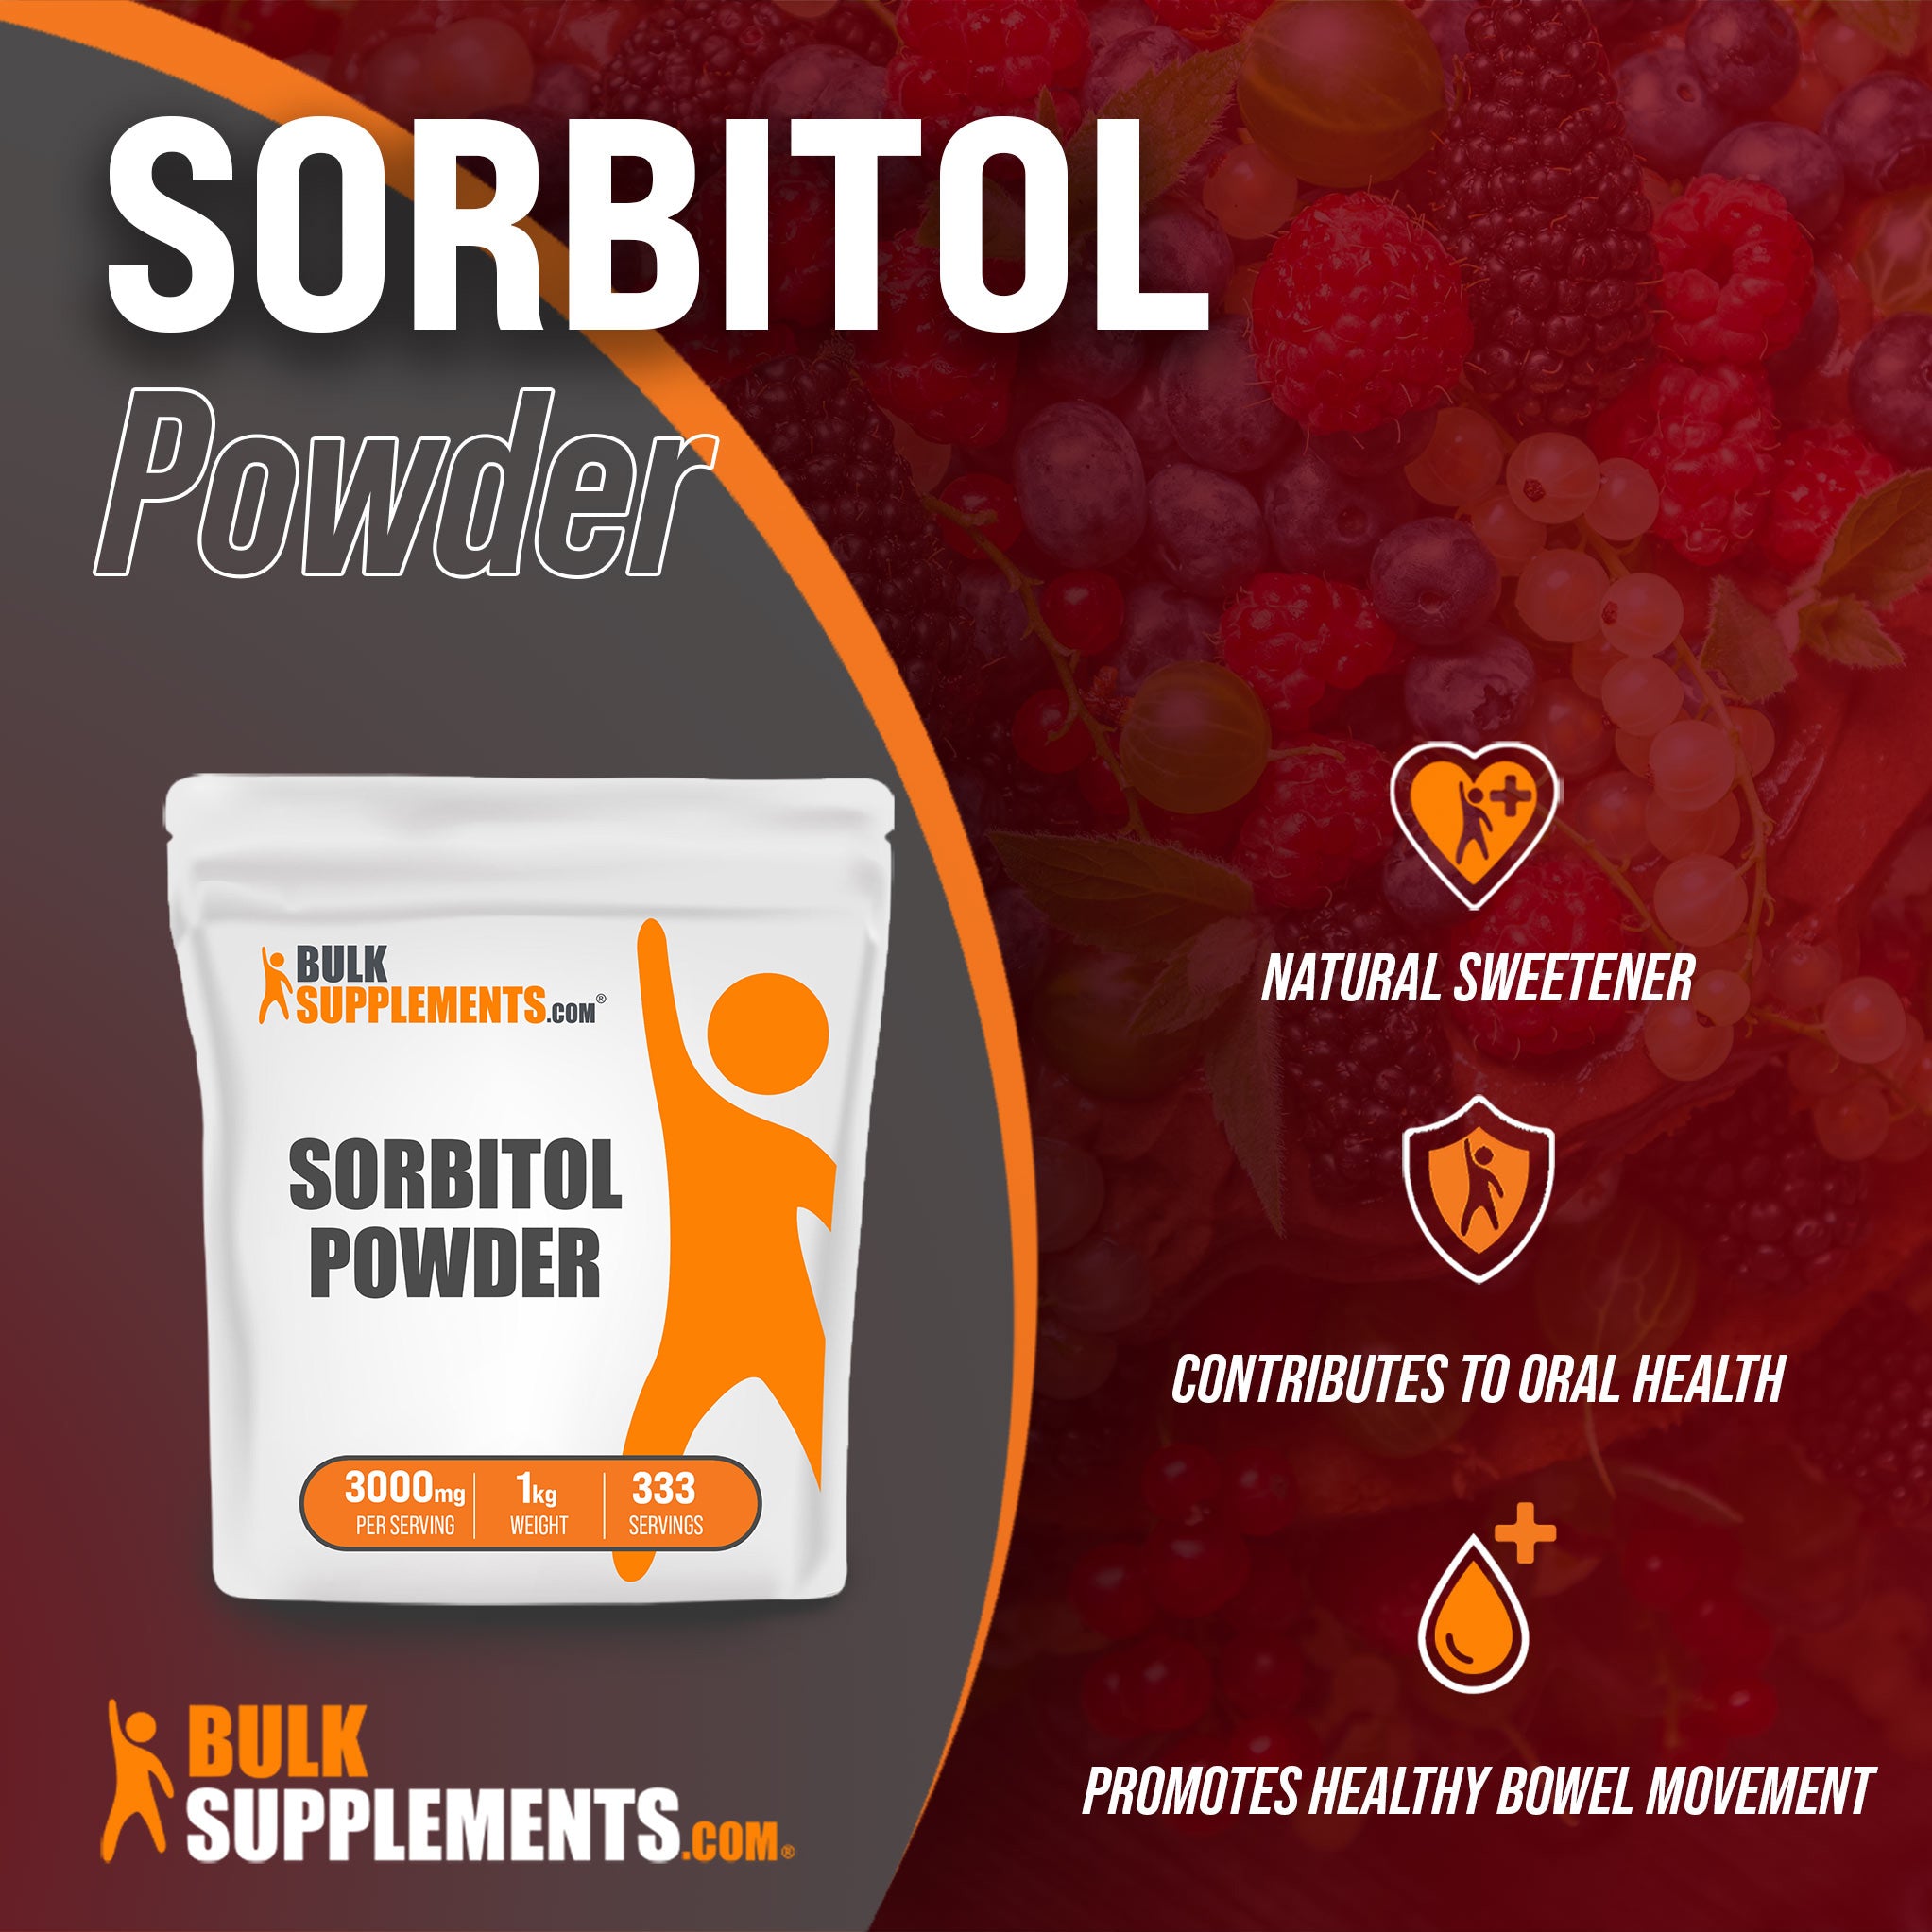 Benefits of Sorbitol Powder: natural sweetener, contributes to oral health, promotes healthy bowel movement